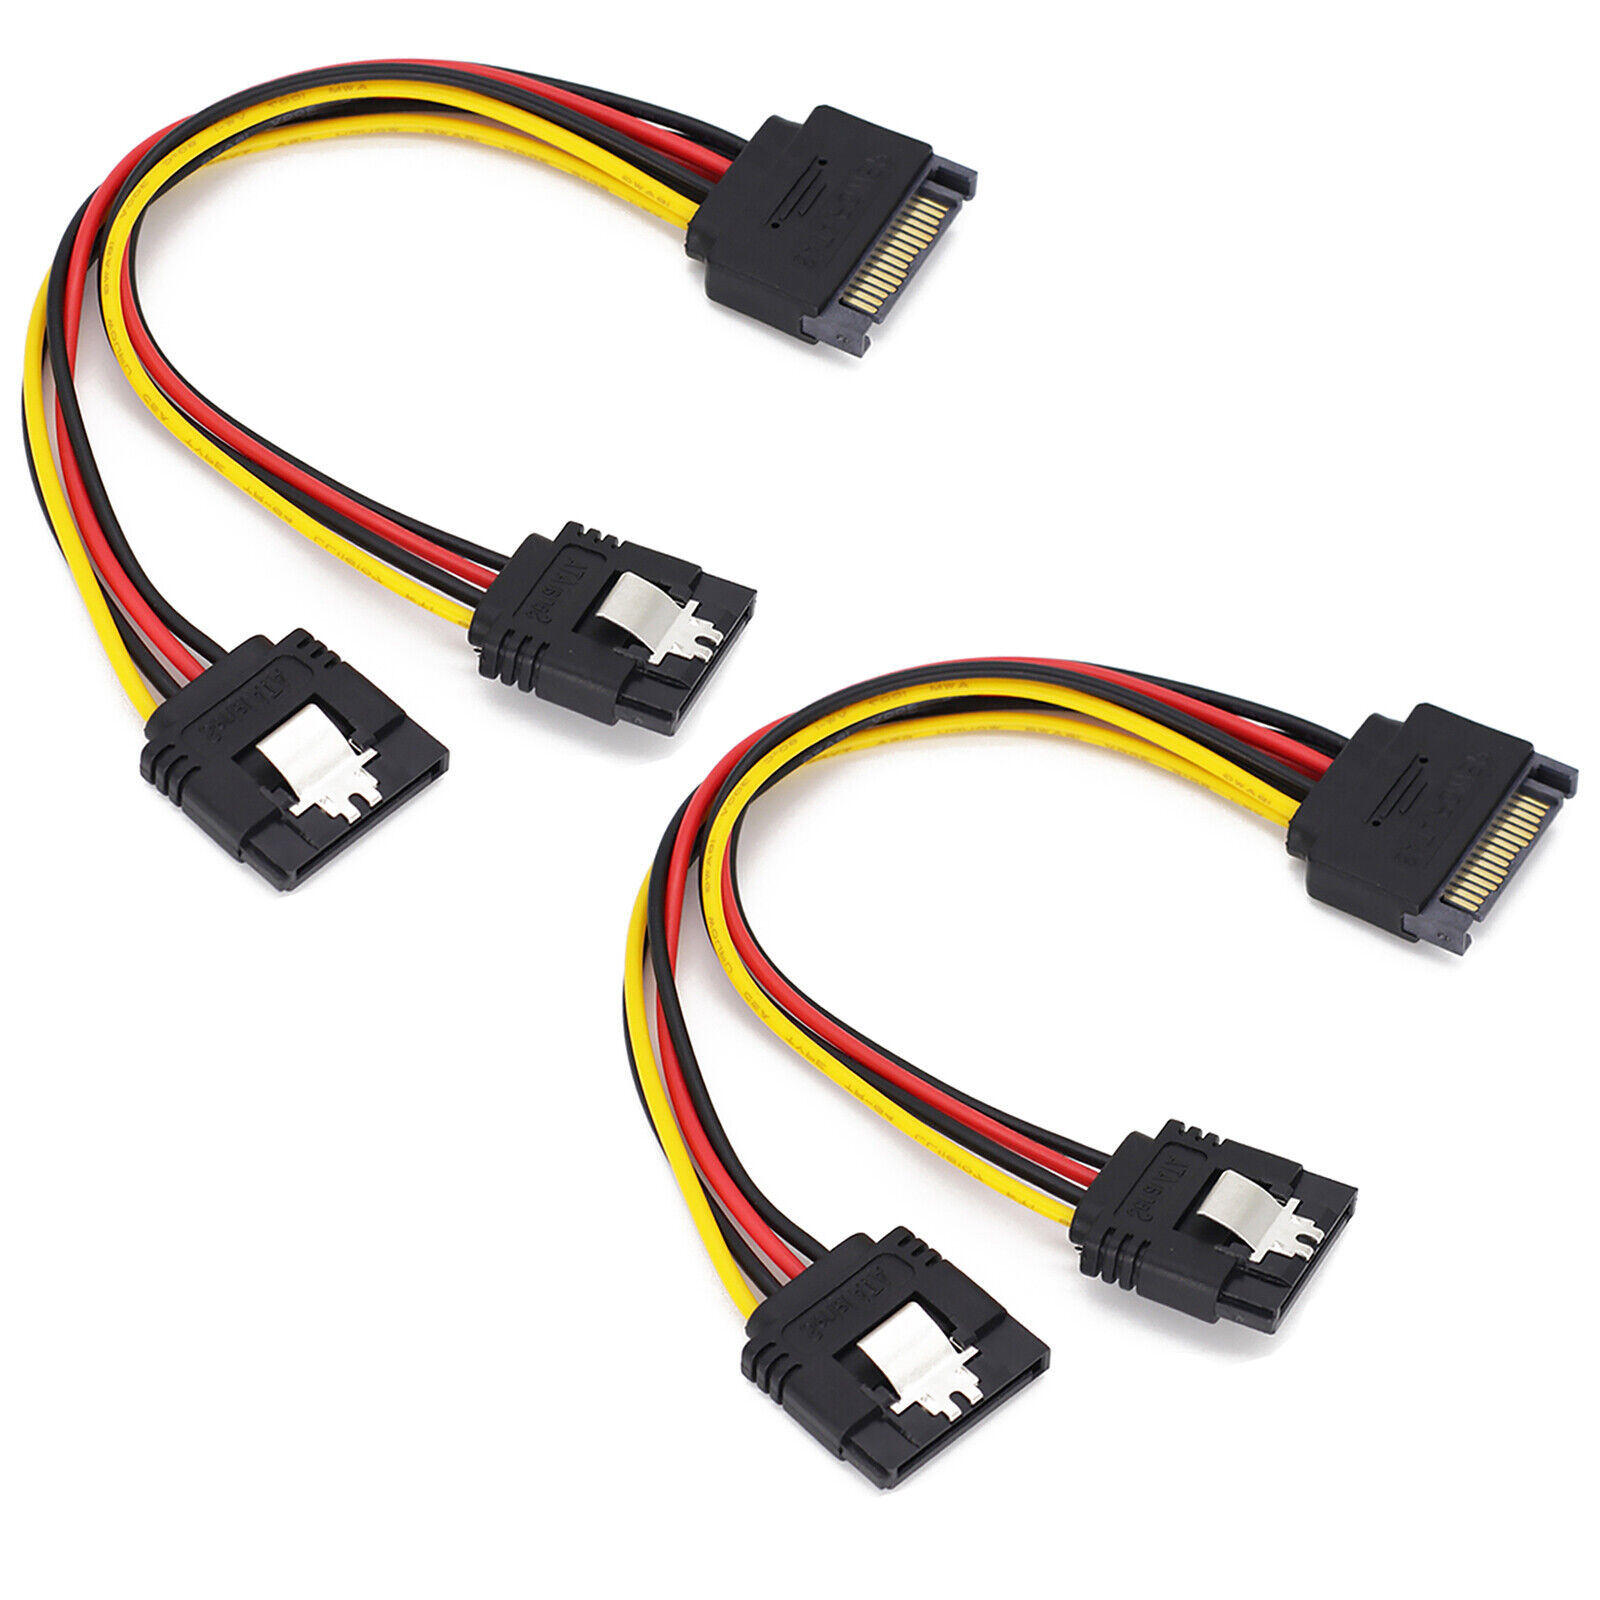 10PCS SATA Power 15-pin Y-Splitter Cable Adapter Male to Female Lot for SSD HDD 